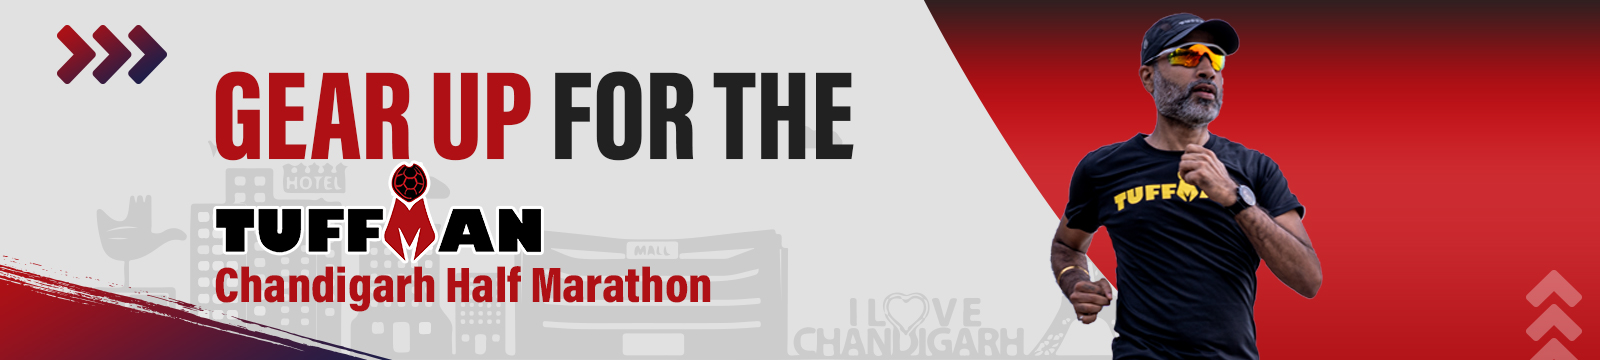 Gear up for the Tuffman Chandigarh Half Marathon 2022 with CityWoofer